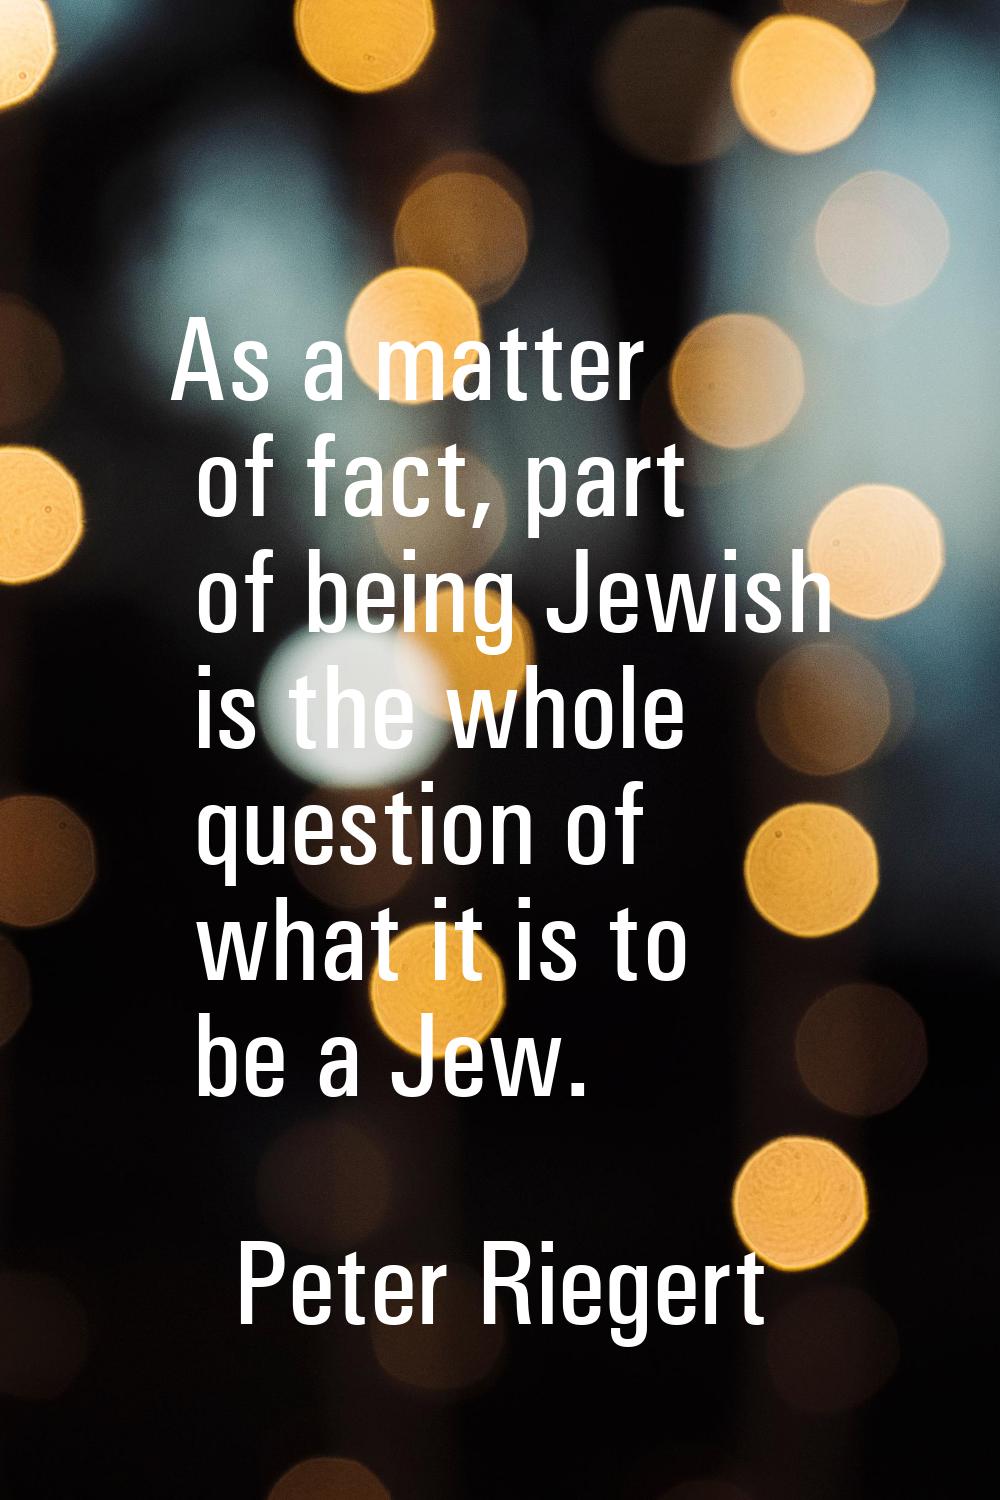 As a matter of fact, part of being Jewish is the whole question of what it is to be a Jew.